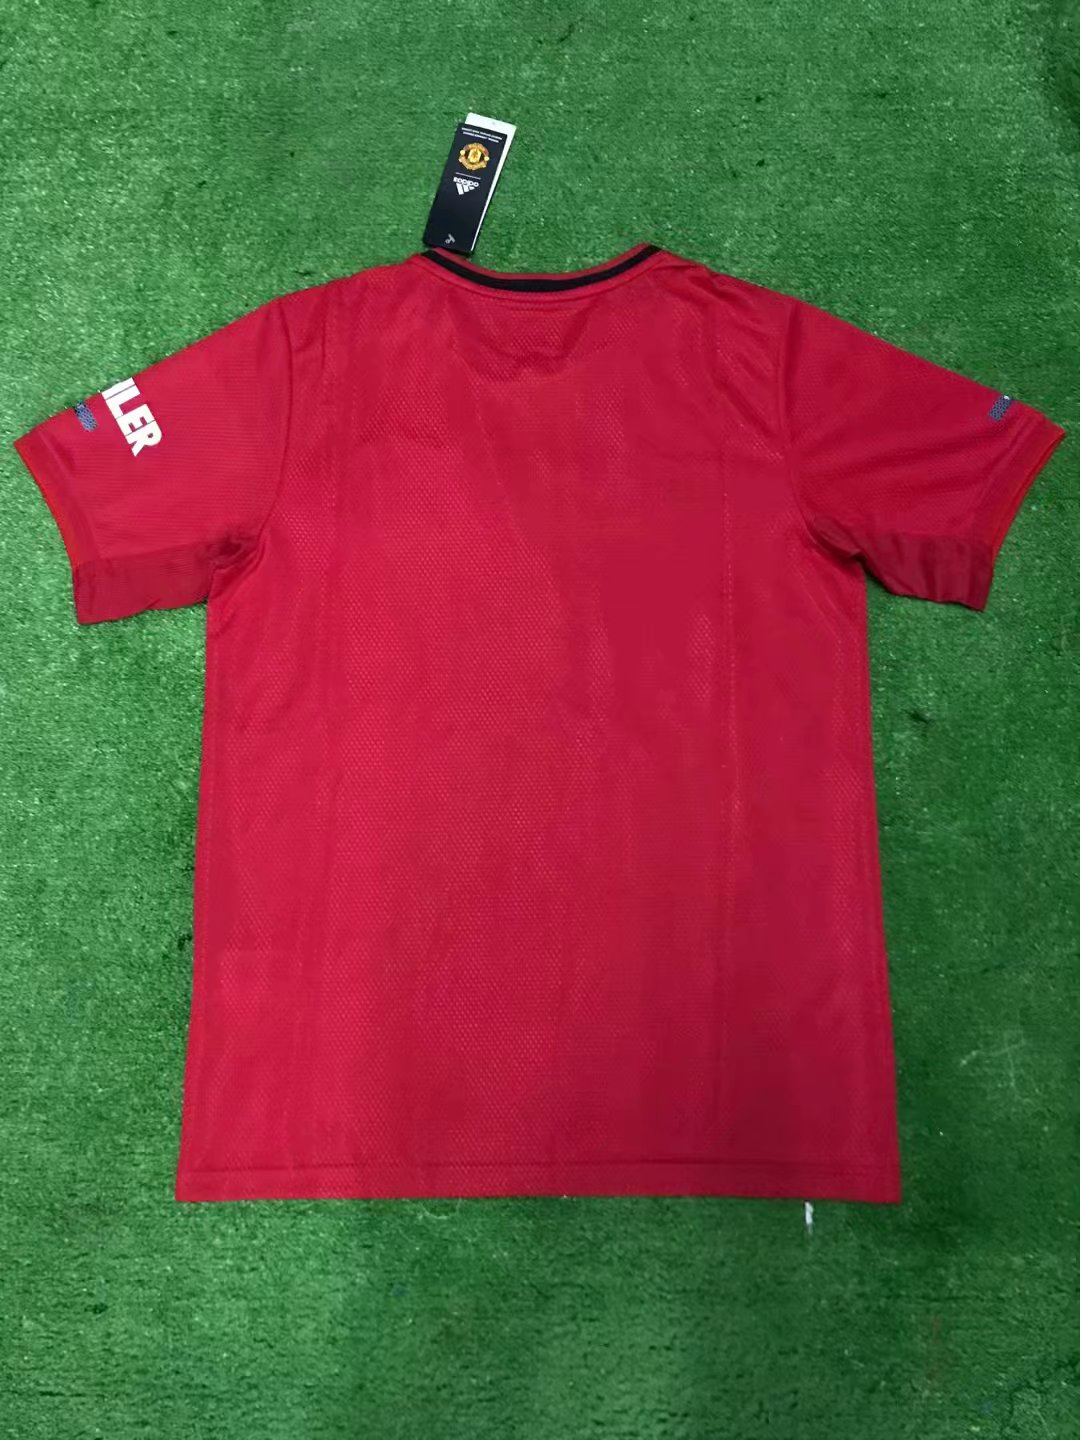 19-20 Manchester United Home Red Jersey Shirt - Click Image to Close